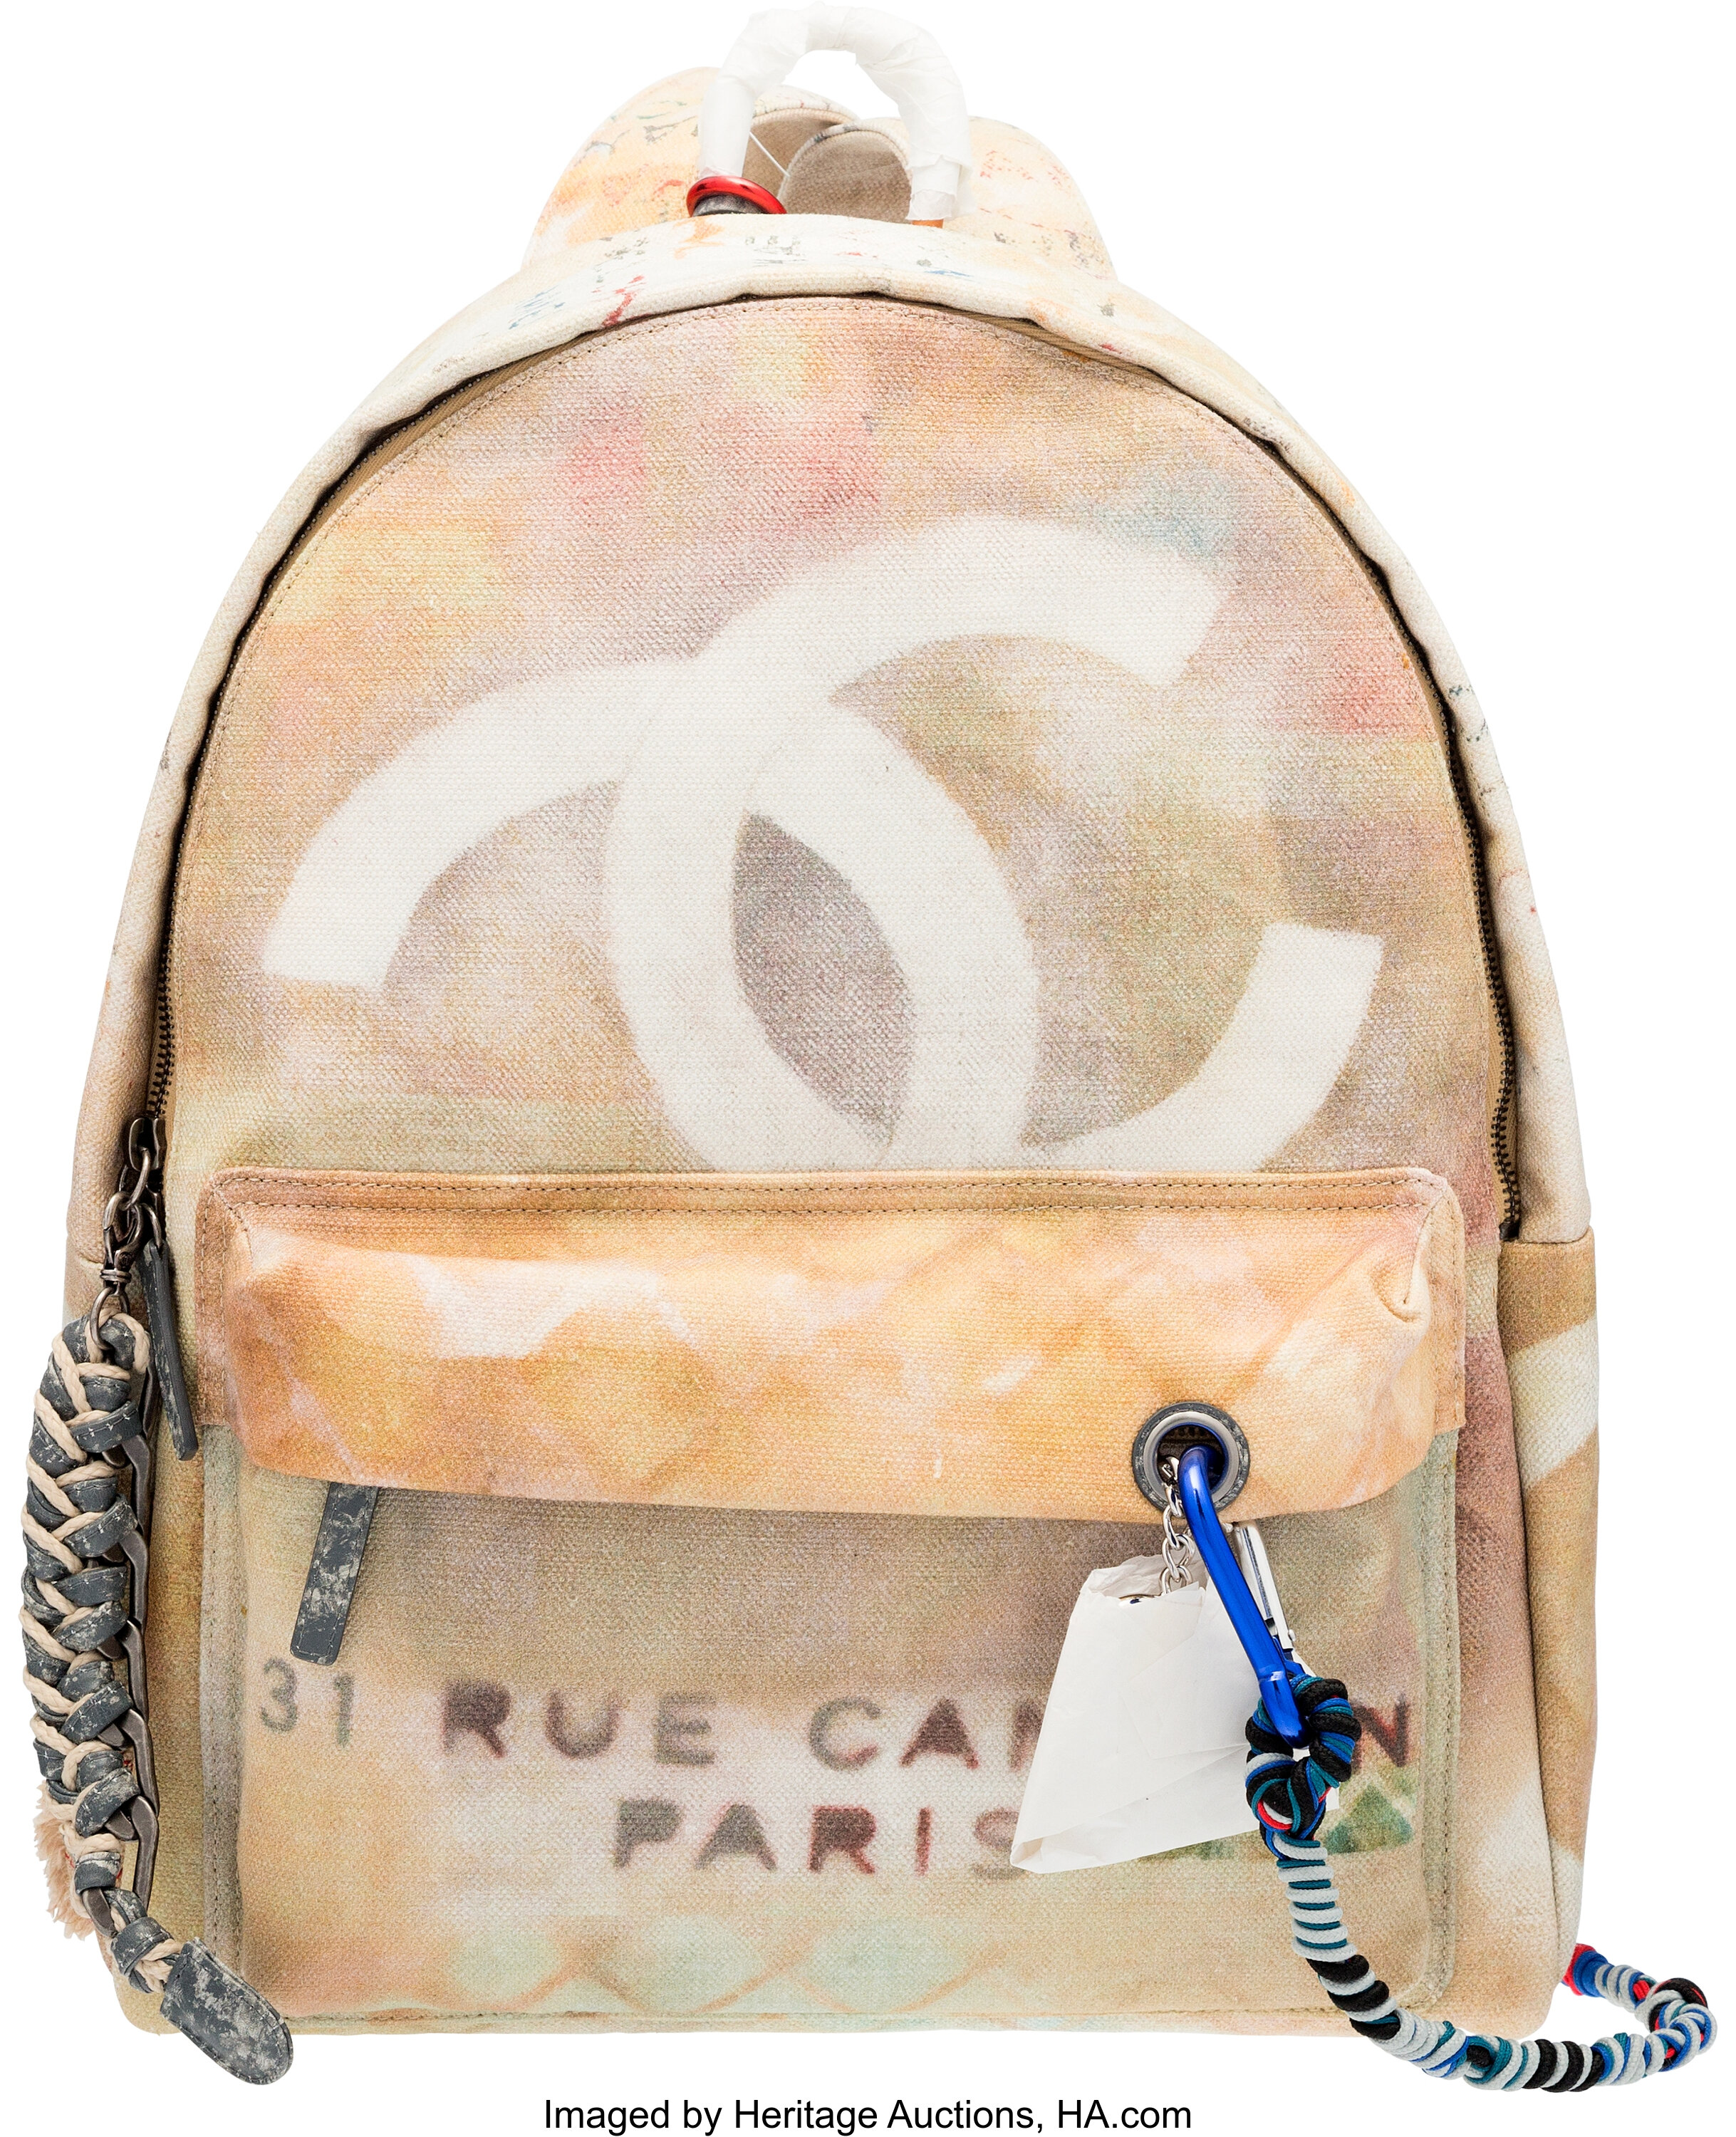 A RUNWAY NATURAL & MULTICOLOR ÉTOILE CANVAS GRAFFITI BACKPACK WITH